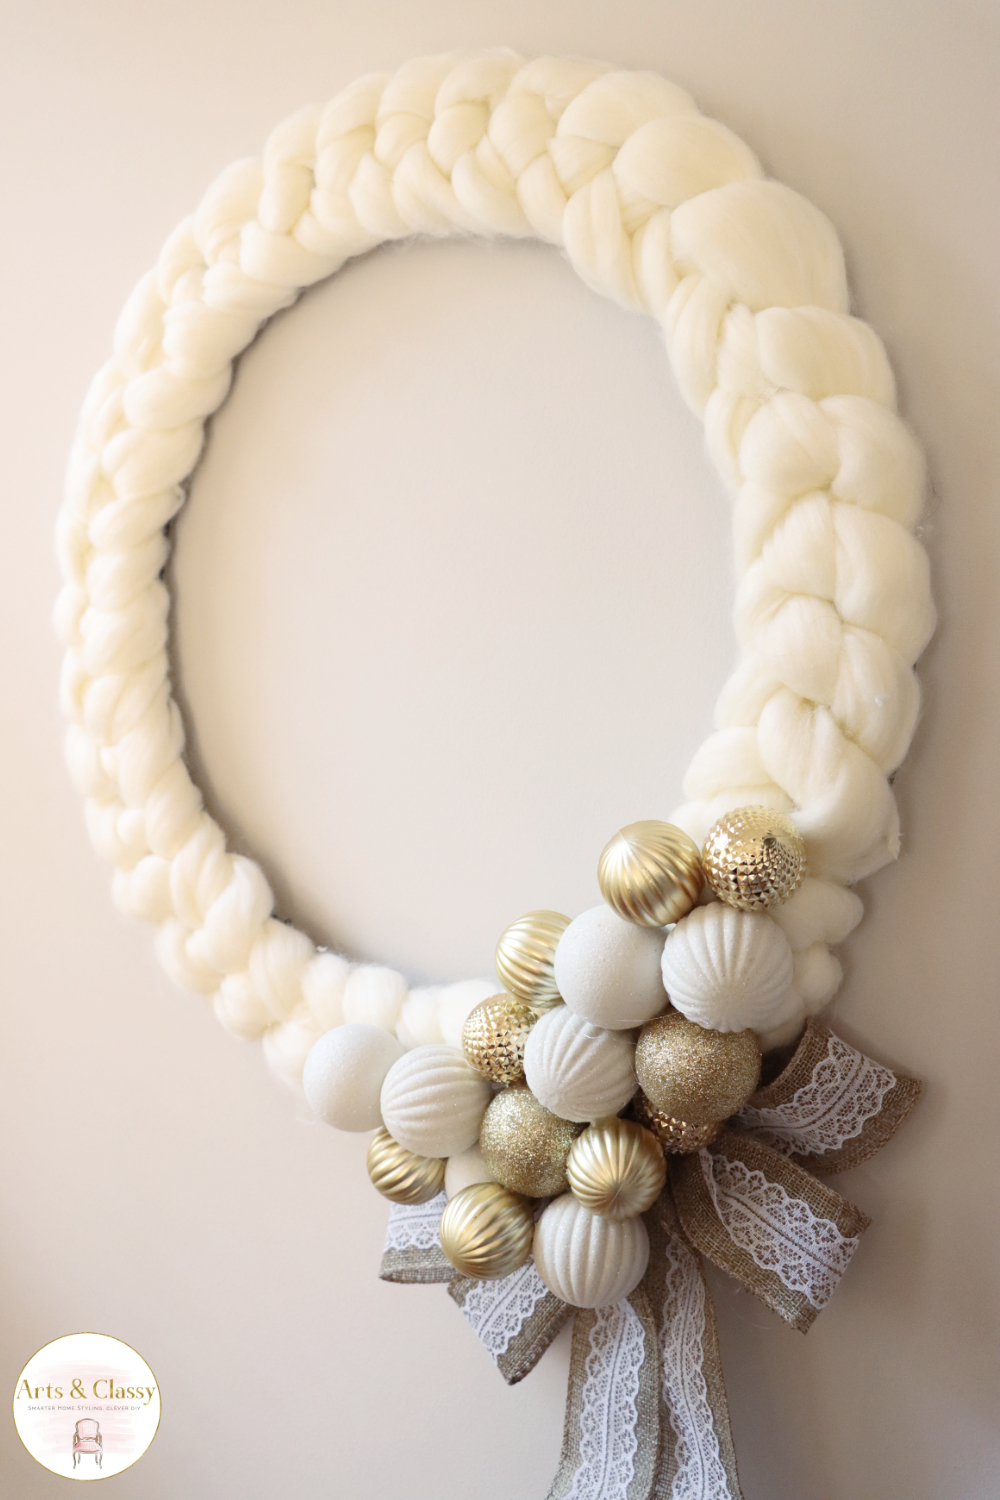 How Quickly Can You Make a Festive Arm Knitted Wreath This Year?